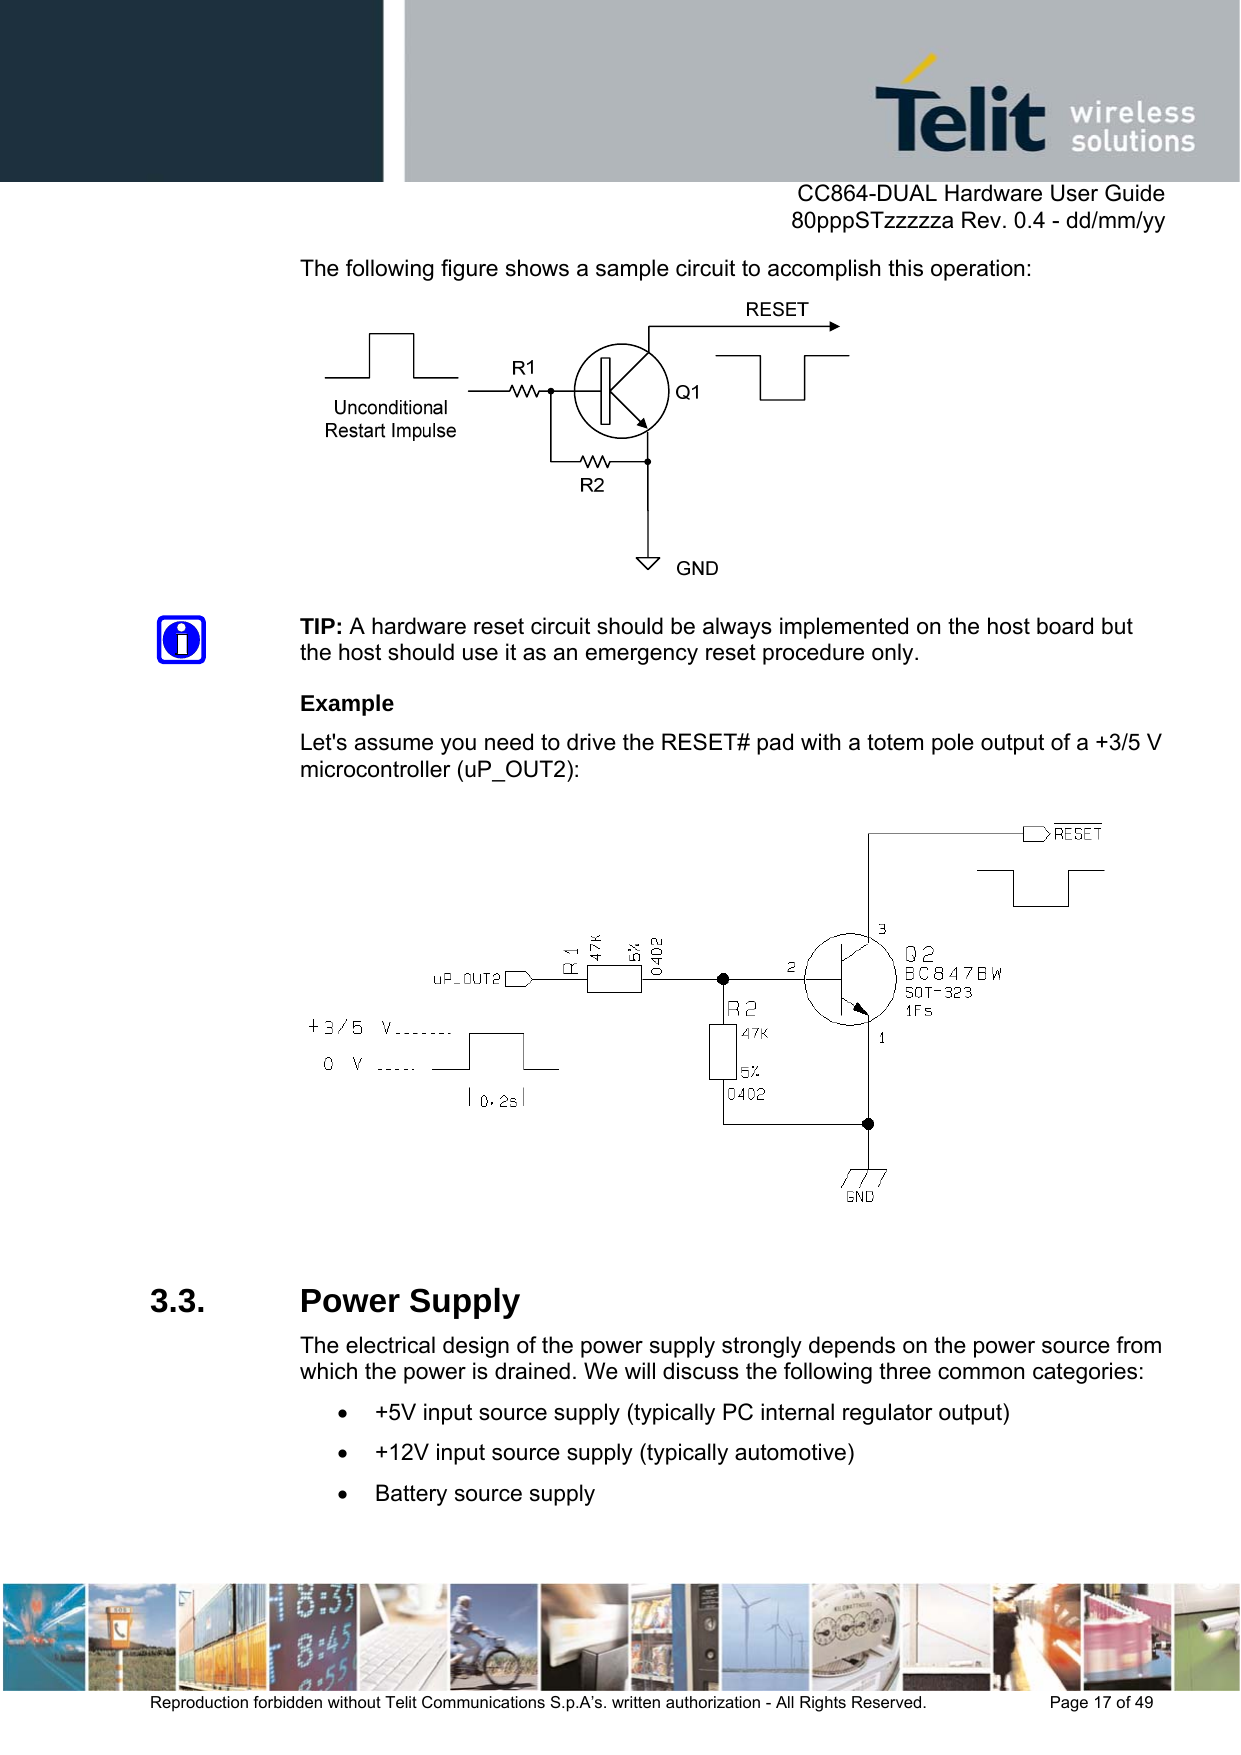      CC864-DUAL Hardware User Guide   80pppSTzzzzza Rev. 0.4 - dd/mm/yy   Reproduction forbidden without Telit Communications S.p.A’s. written authorization - All Rights Reserved.    Page 17 of 49  The following figure shows a sample circuit to accomplish this operation:   TIP: A hardware reset circuit should be always implemented on the host board but the host should use it as an emergency reset procedure only. Example Let&apos;s assume you need to drive the RESET# pad with a totem pole output of a +3/5 V microcontroller (uP_OUT2):   3.3. Power Supply The electrical design of the power supply strongly depends on the power source from which the power is drained. We will discuss the following three common categories: •  +5V input source supply (typically PC internal regulator output) •  +12V input source supply (typically automotive) •  Battery source supply  